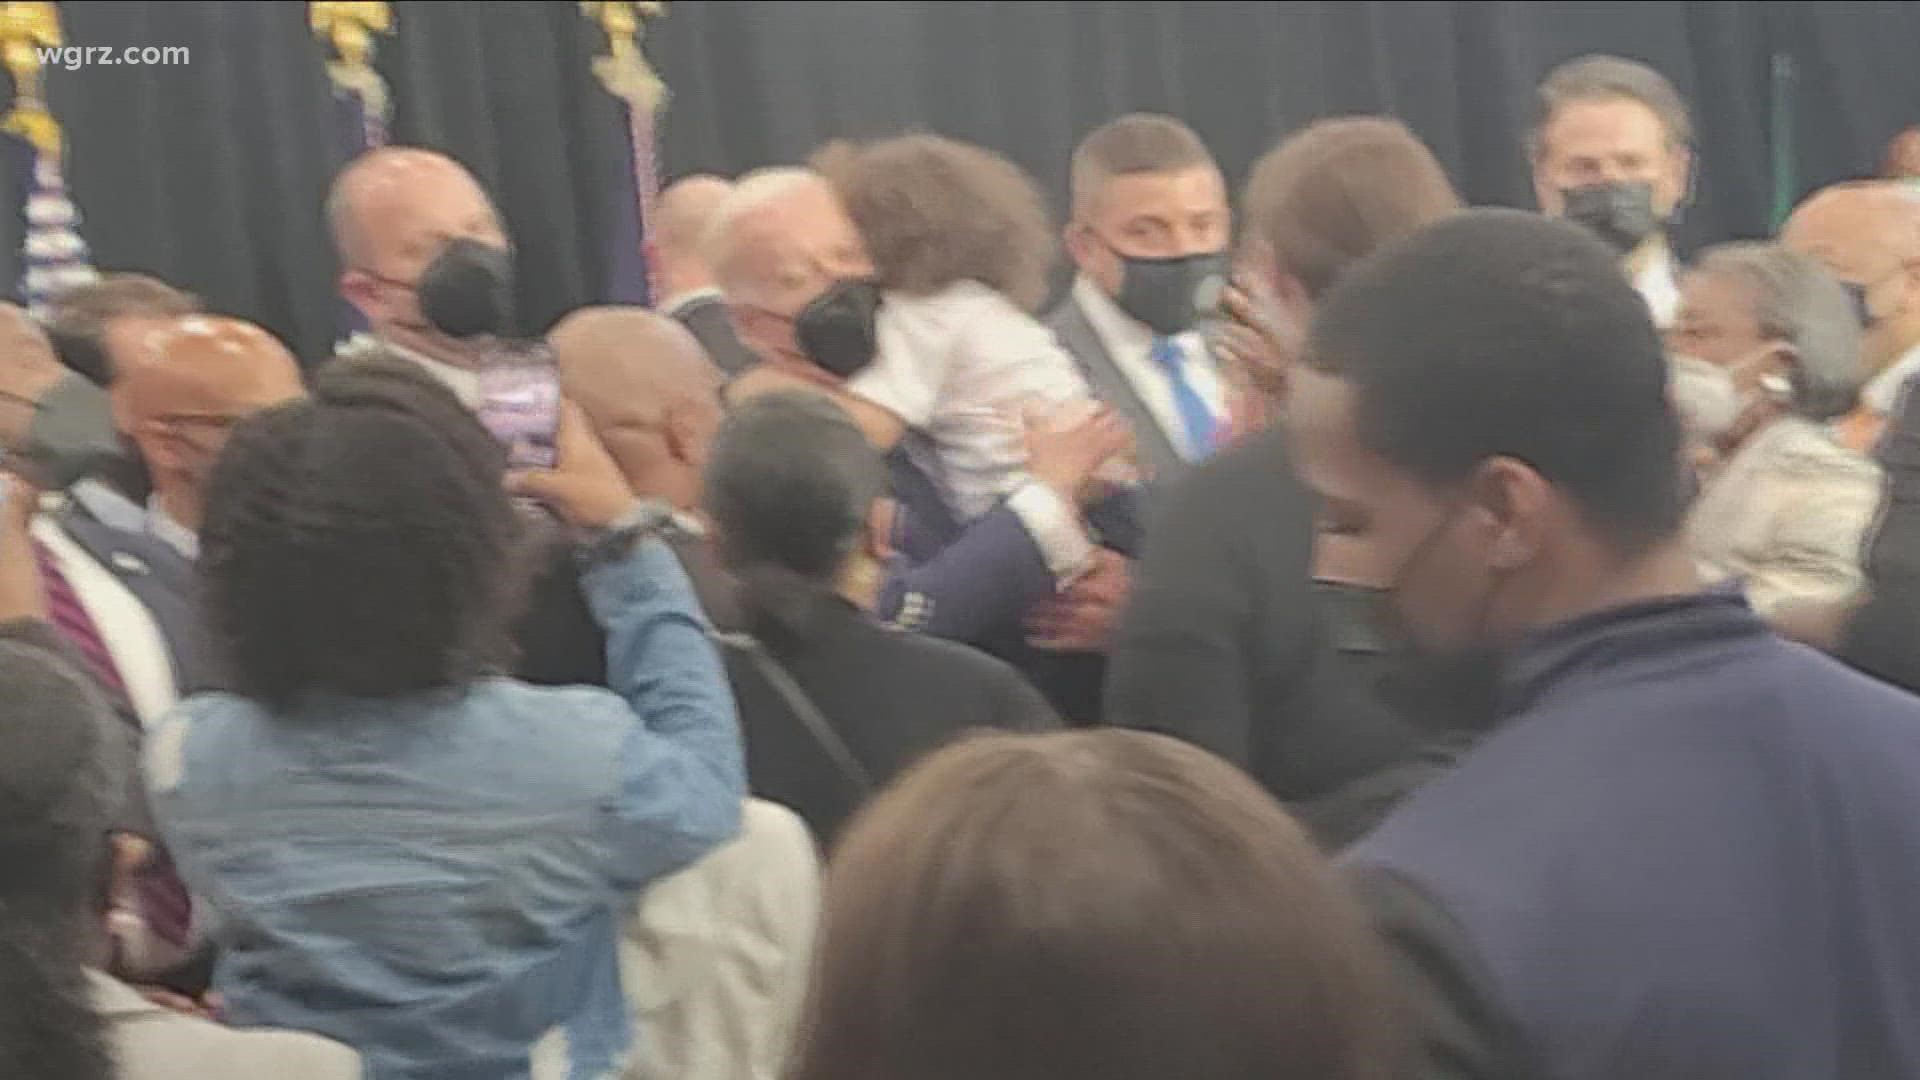 probably the moment...watching president Biden hold Andre's Mackniel son before leaving the gym.